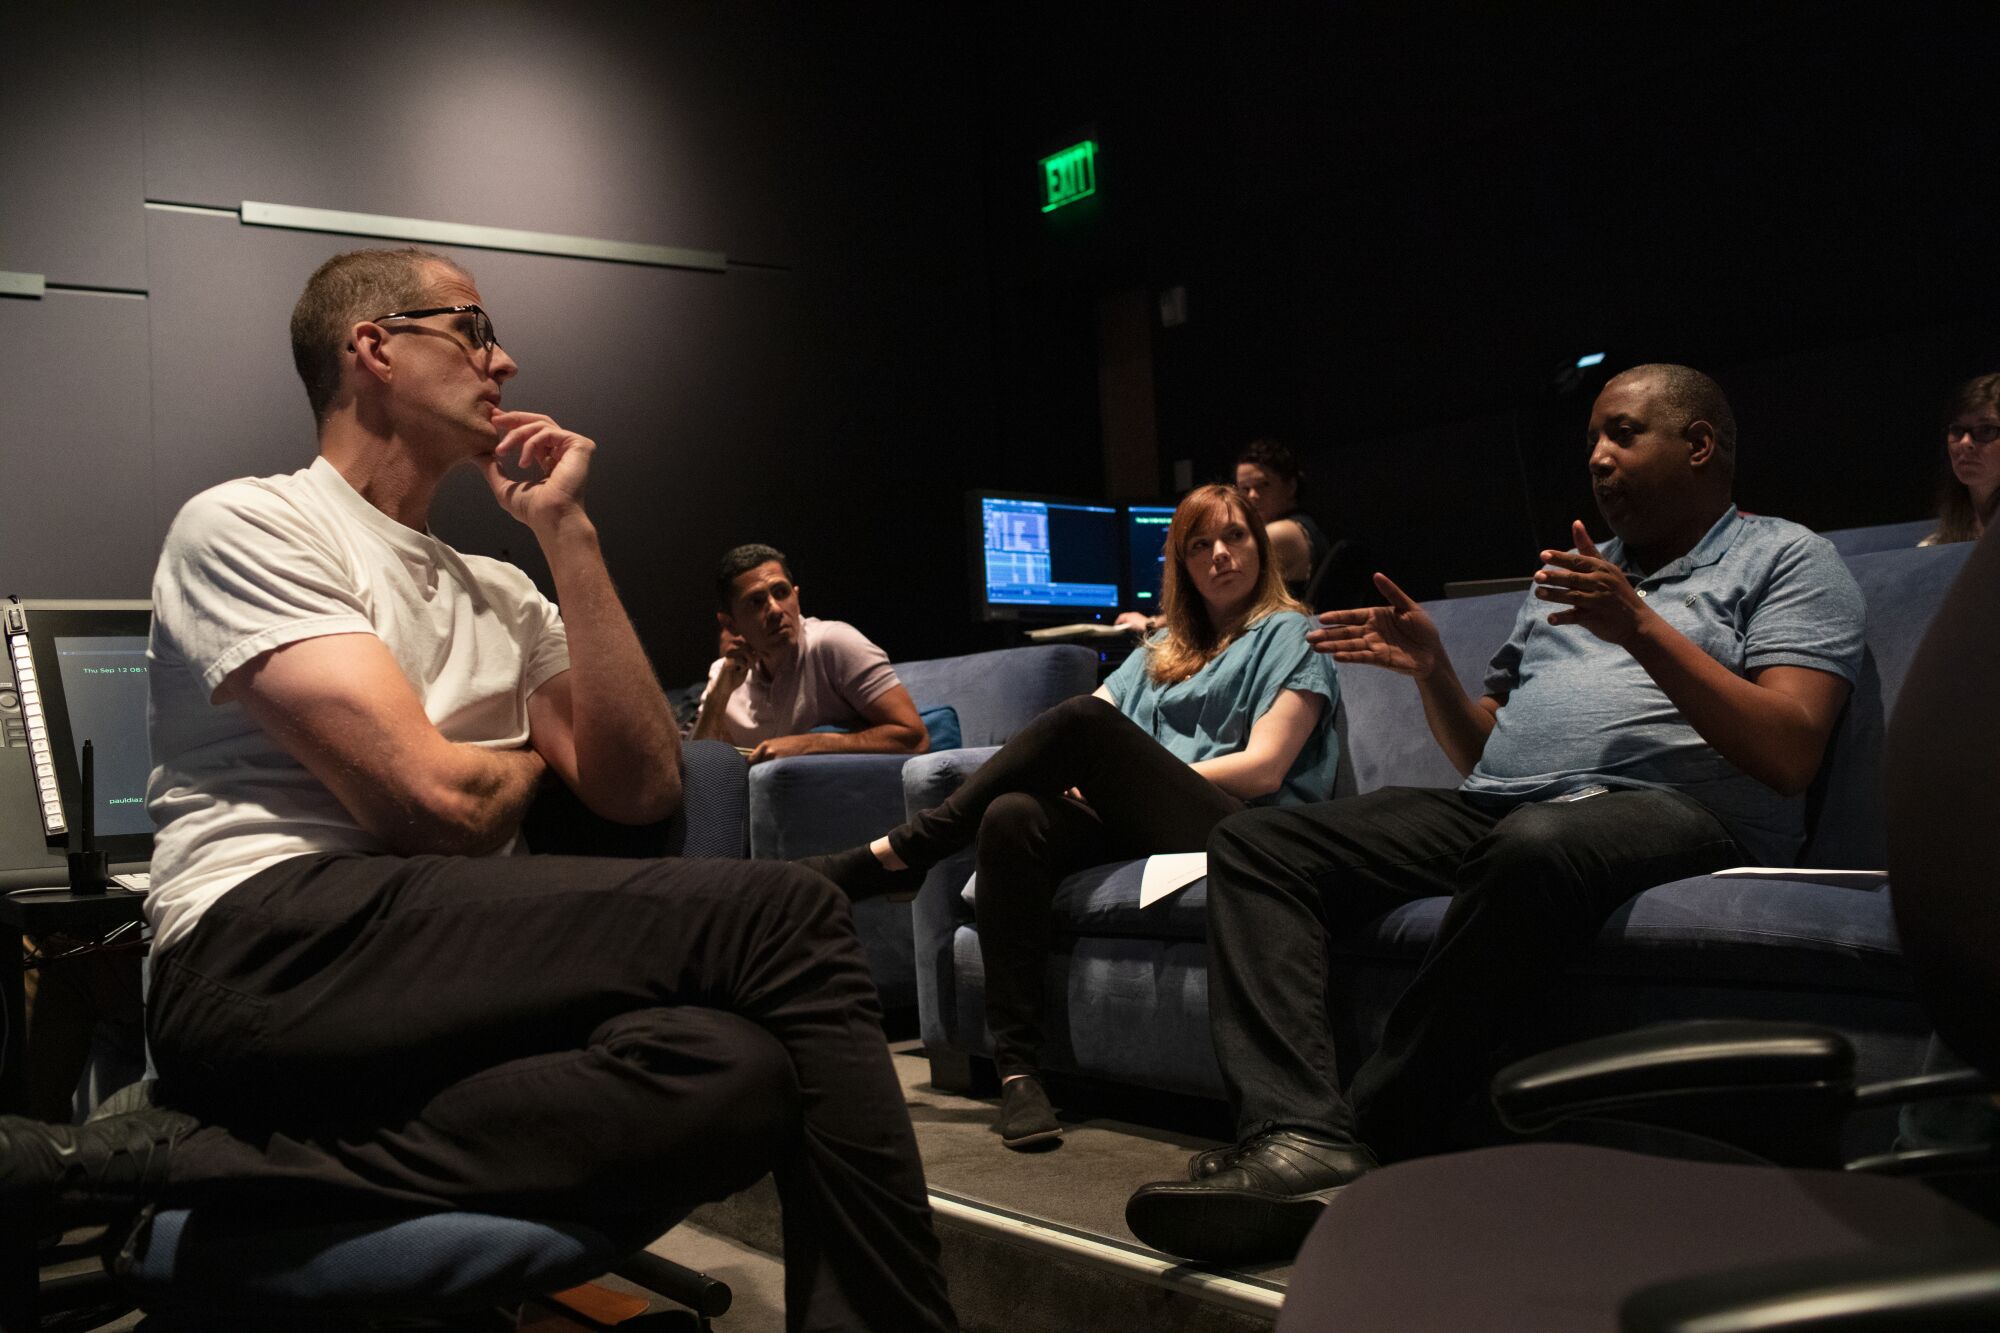 "Soul's" Pete Docter, Jude Brownbill and Kemp Powers, in a screening room, discuss progress on the feature.